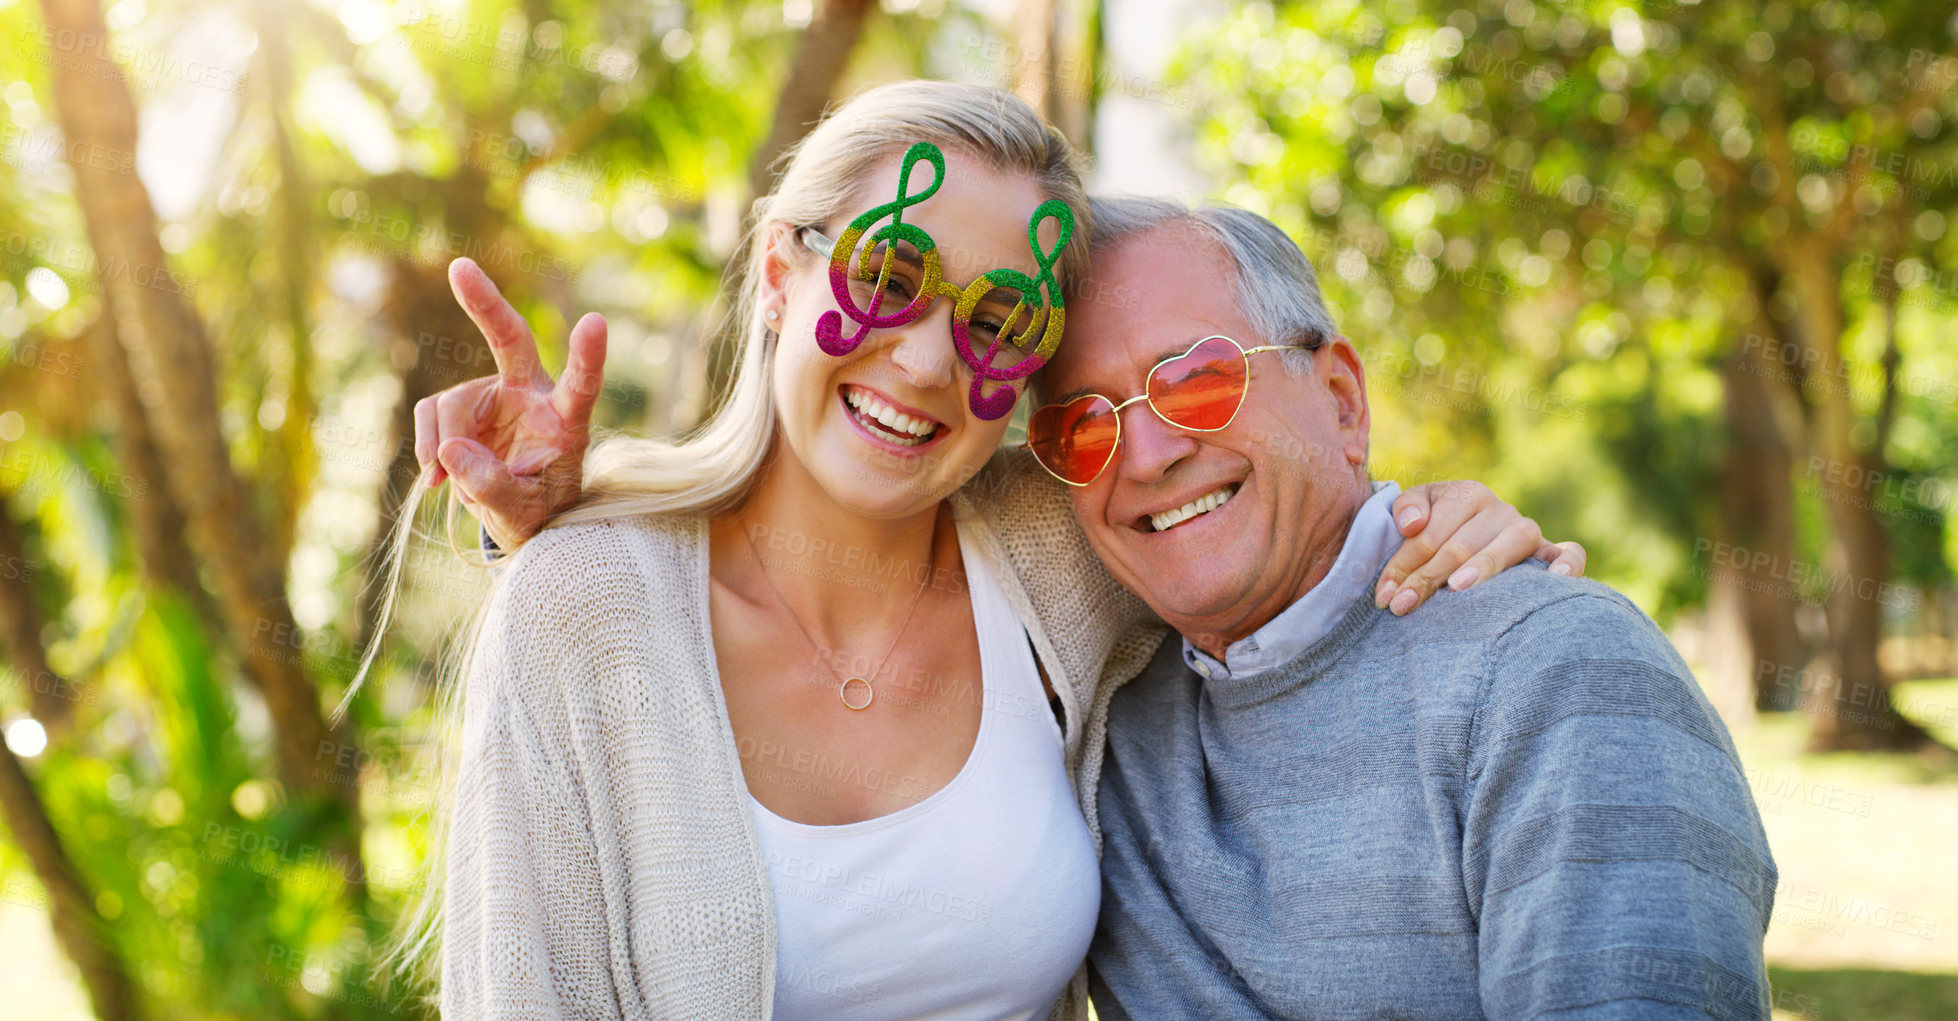 Buy stock photo Park, portrait and senior father with daughter, woman or love for care, hug or support in England. Smile, cool sunglasses or elderly man with girl in retirement on holiday in outdoor garden or nature